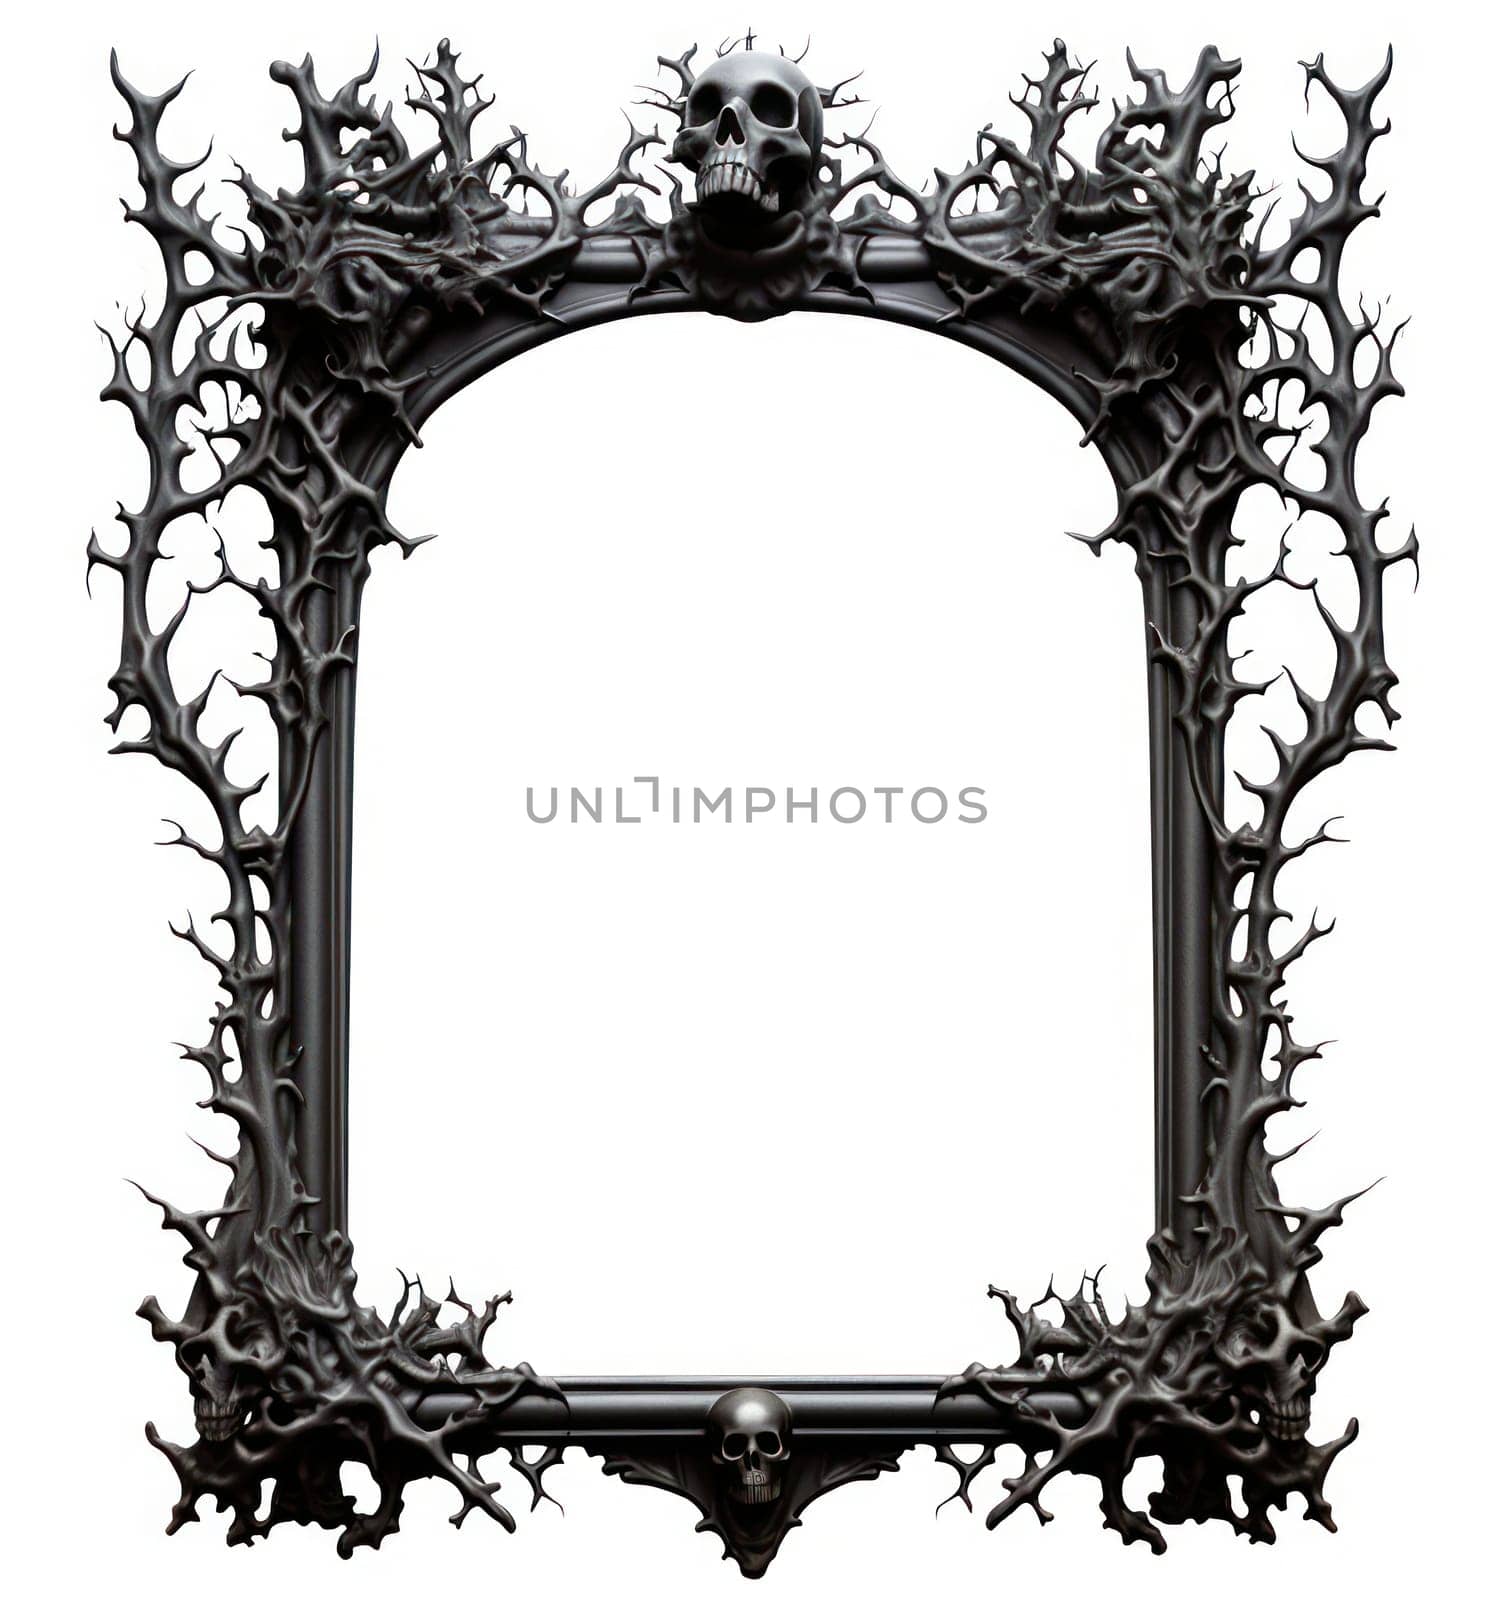 Vintage Baroque Antique Ornate Picture Frame with Decorative Victorian Corner, Retro Elegance and Golden Filigree Design on Rustic White Background: A Timeless Gallery of Art